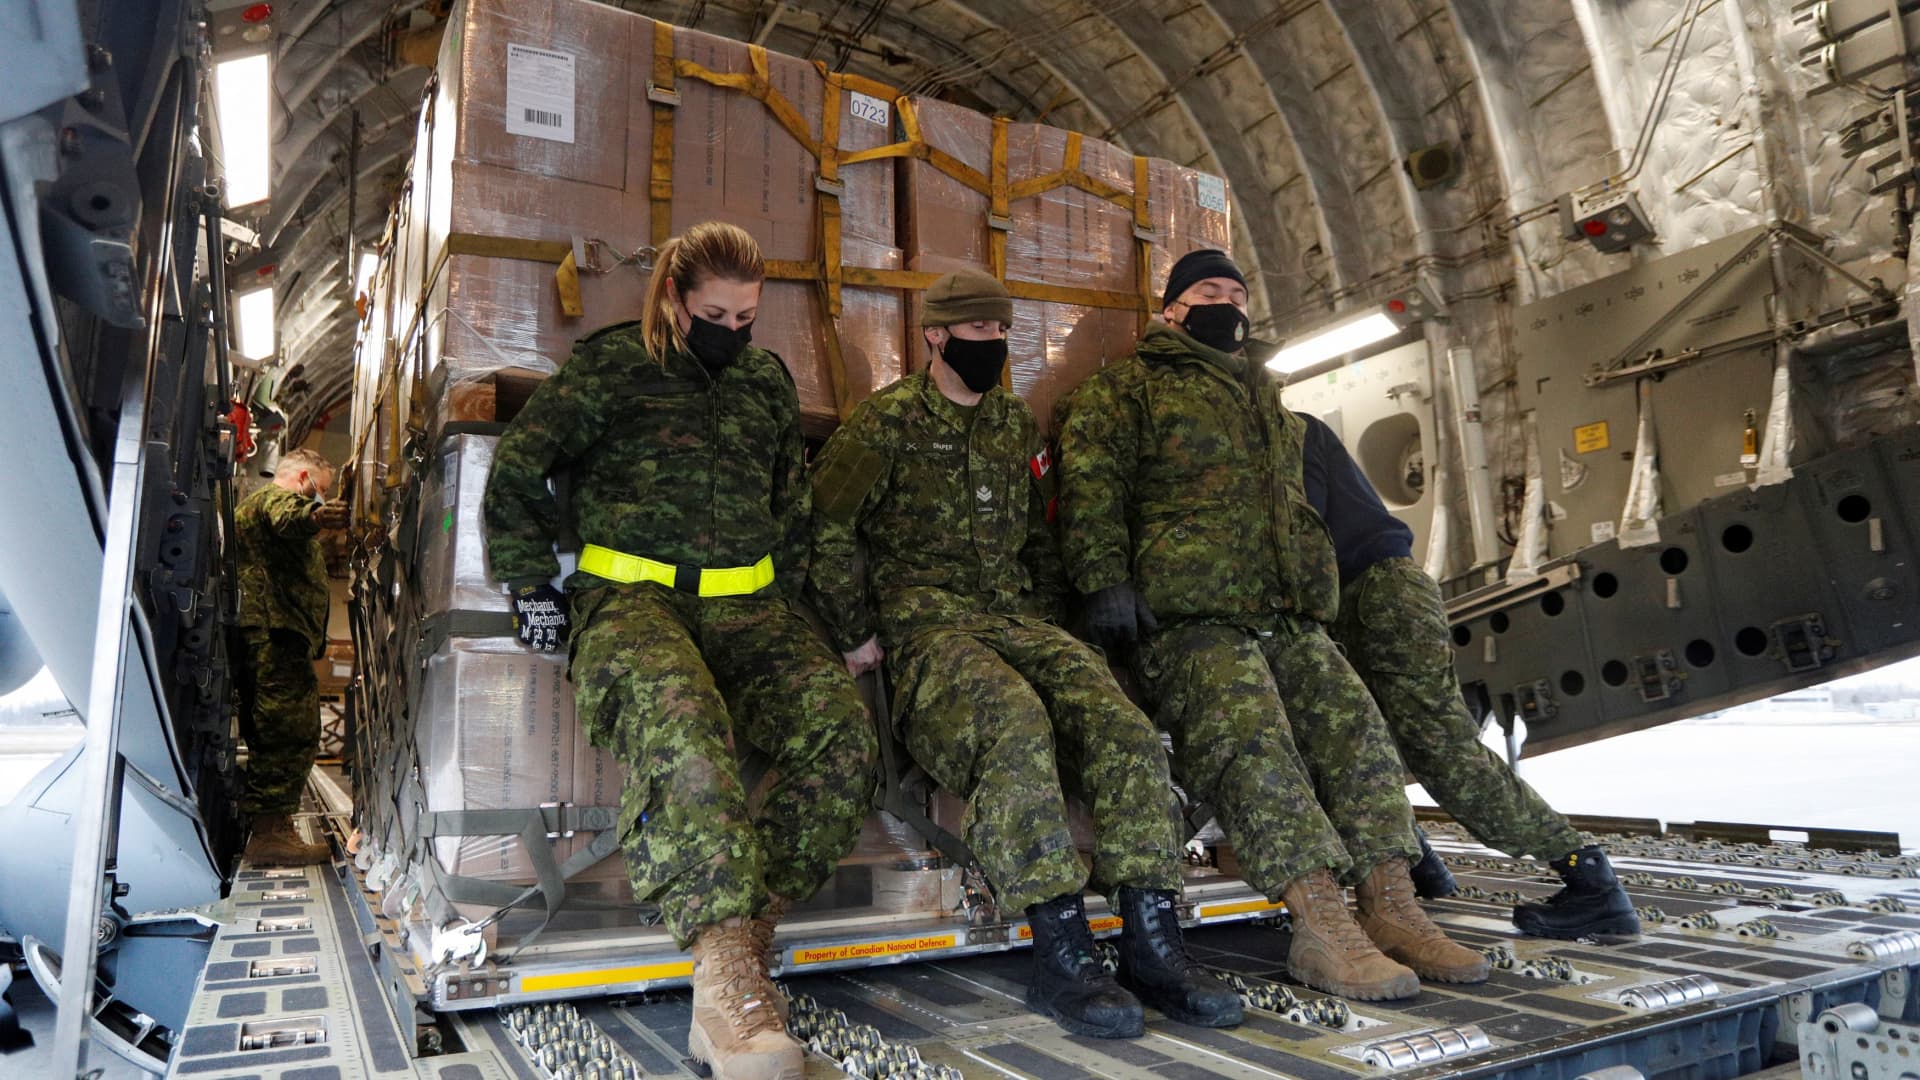 Canadian Forces personnel load lethal and non-lethal aid to be sent to Ukraine, on a transport aircraft bound for Poland, following Russia's invasion of Ukraine, at CFB Trenton in Trenton, Ontario, Canada, March 7, 2022.